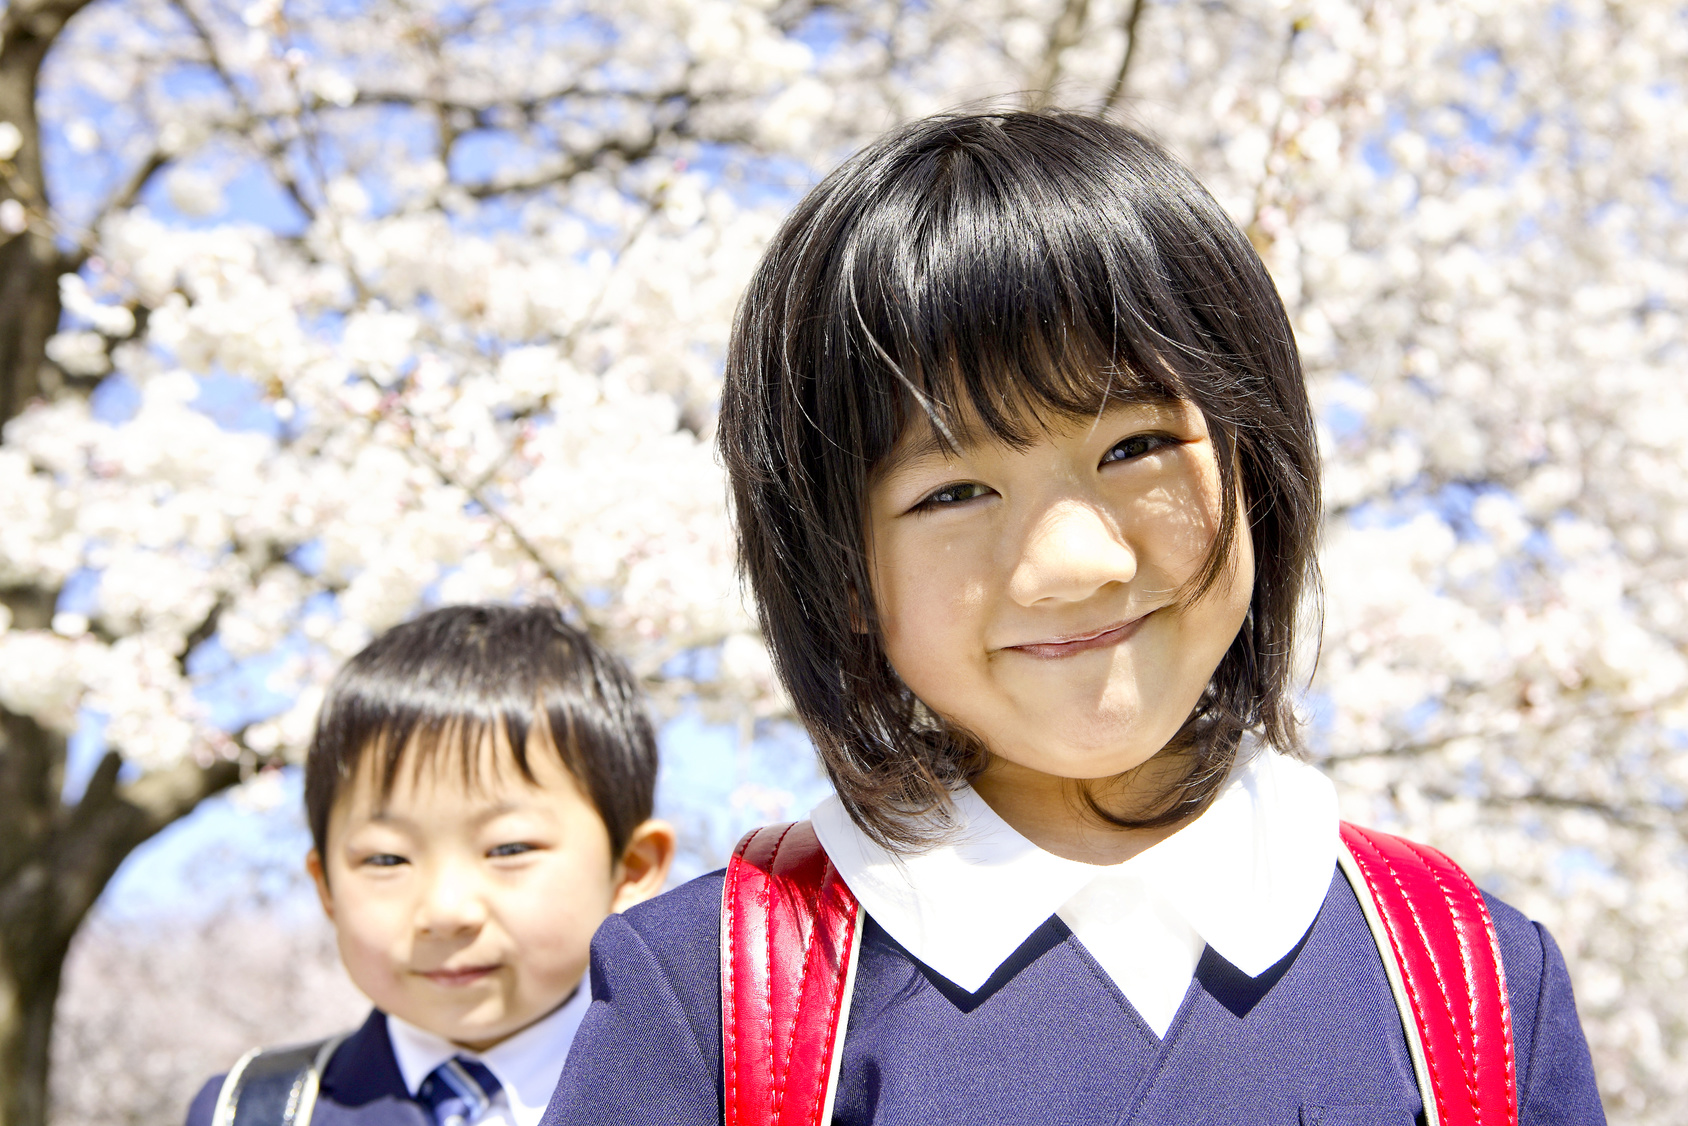 Girl and Boy First Graders are in front of Cherry tree